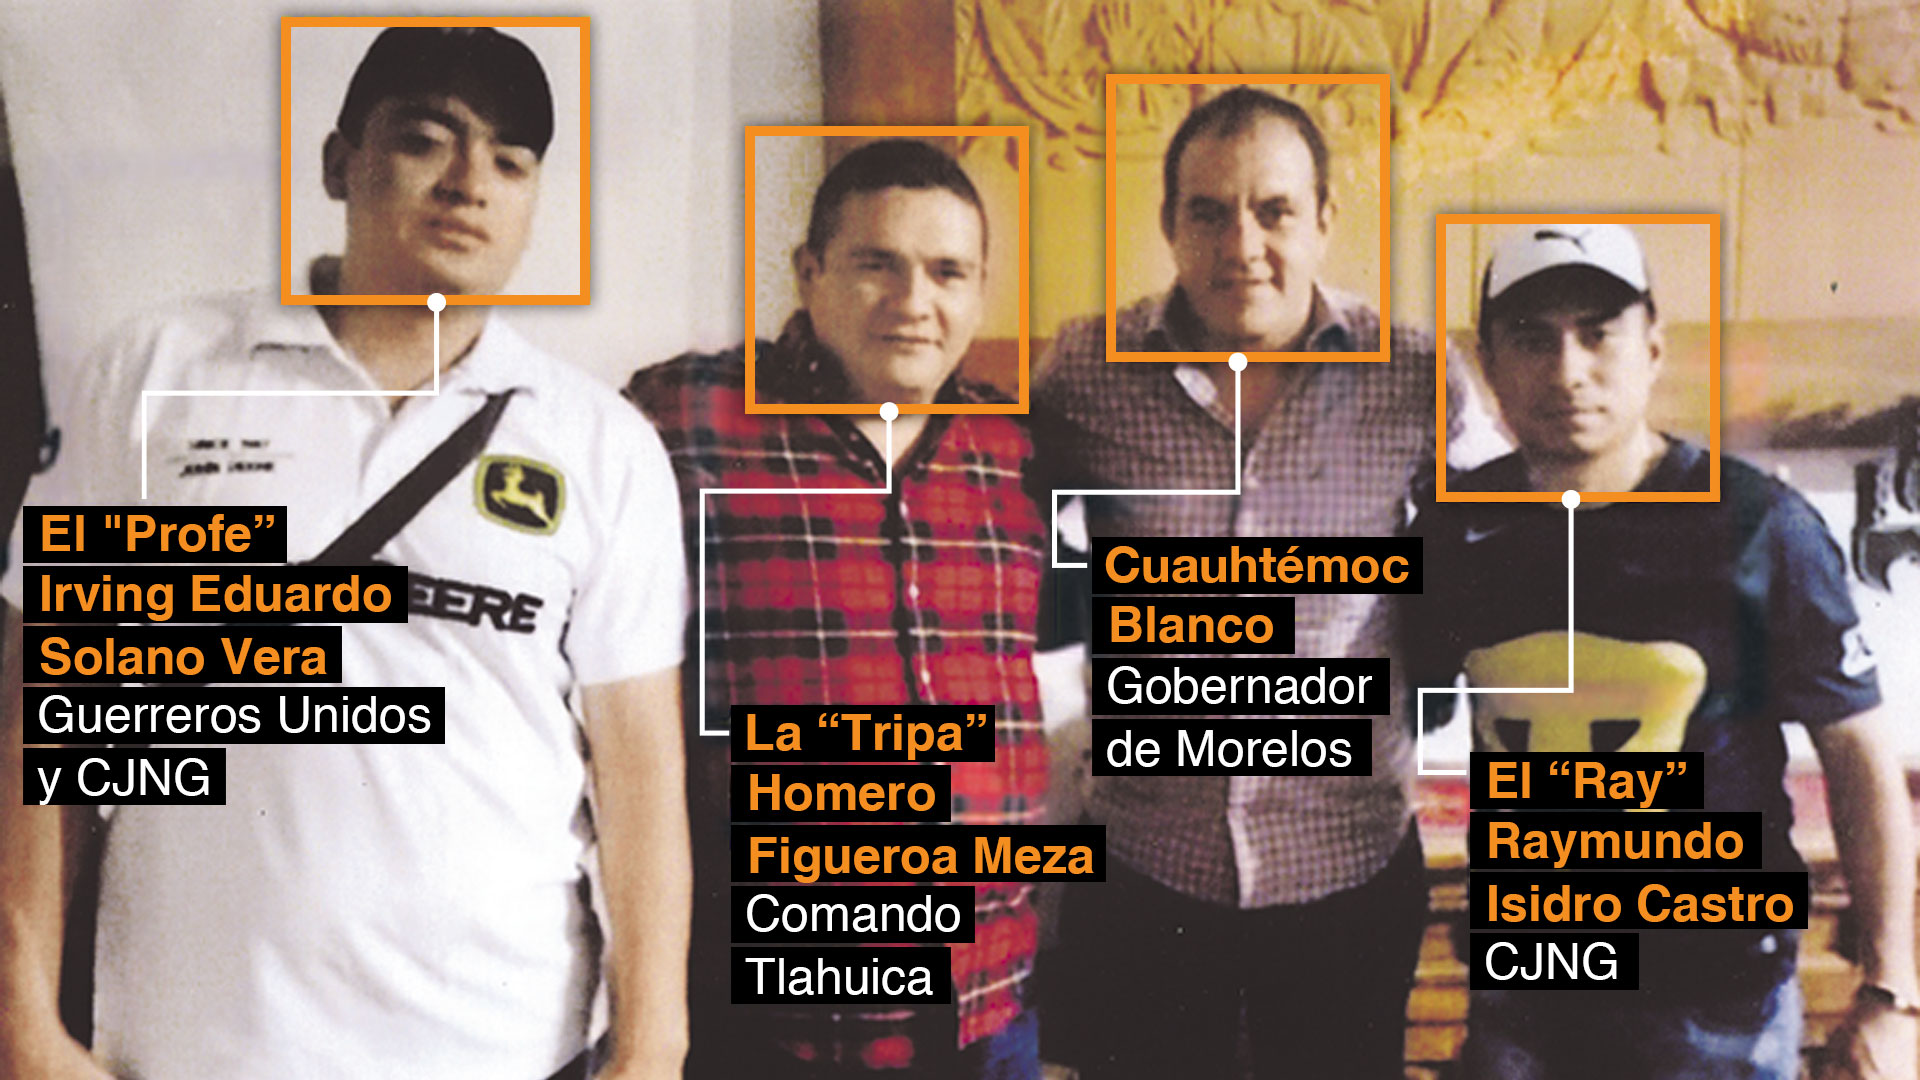 Sources from the state and the federal government assured that Blanco's photograph came from the cell phone of Esther Yadira Huitrón Vázquez and/or Rosario Herrera, alleged operator and PR of the Guerreros Unidos criminal organization in Morelos Photo: Courtesy|El Sol de México